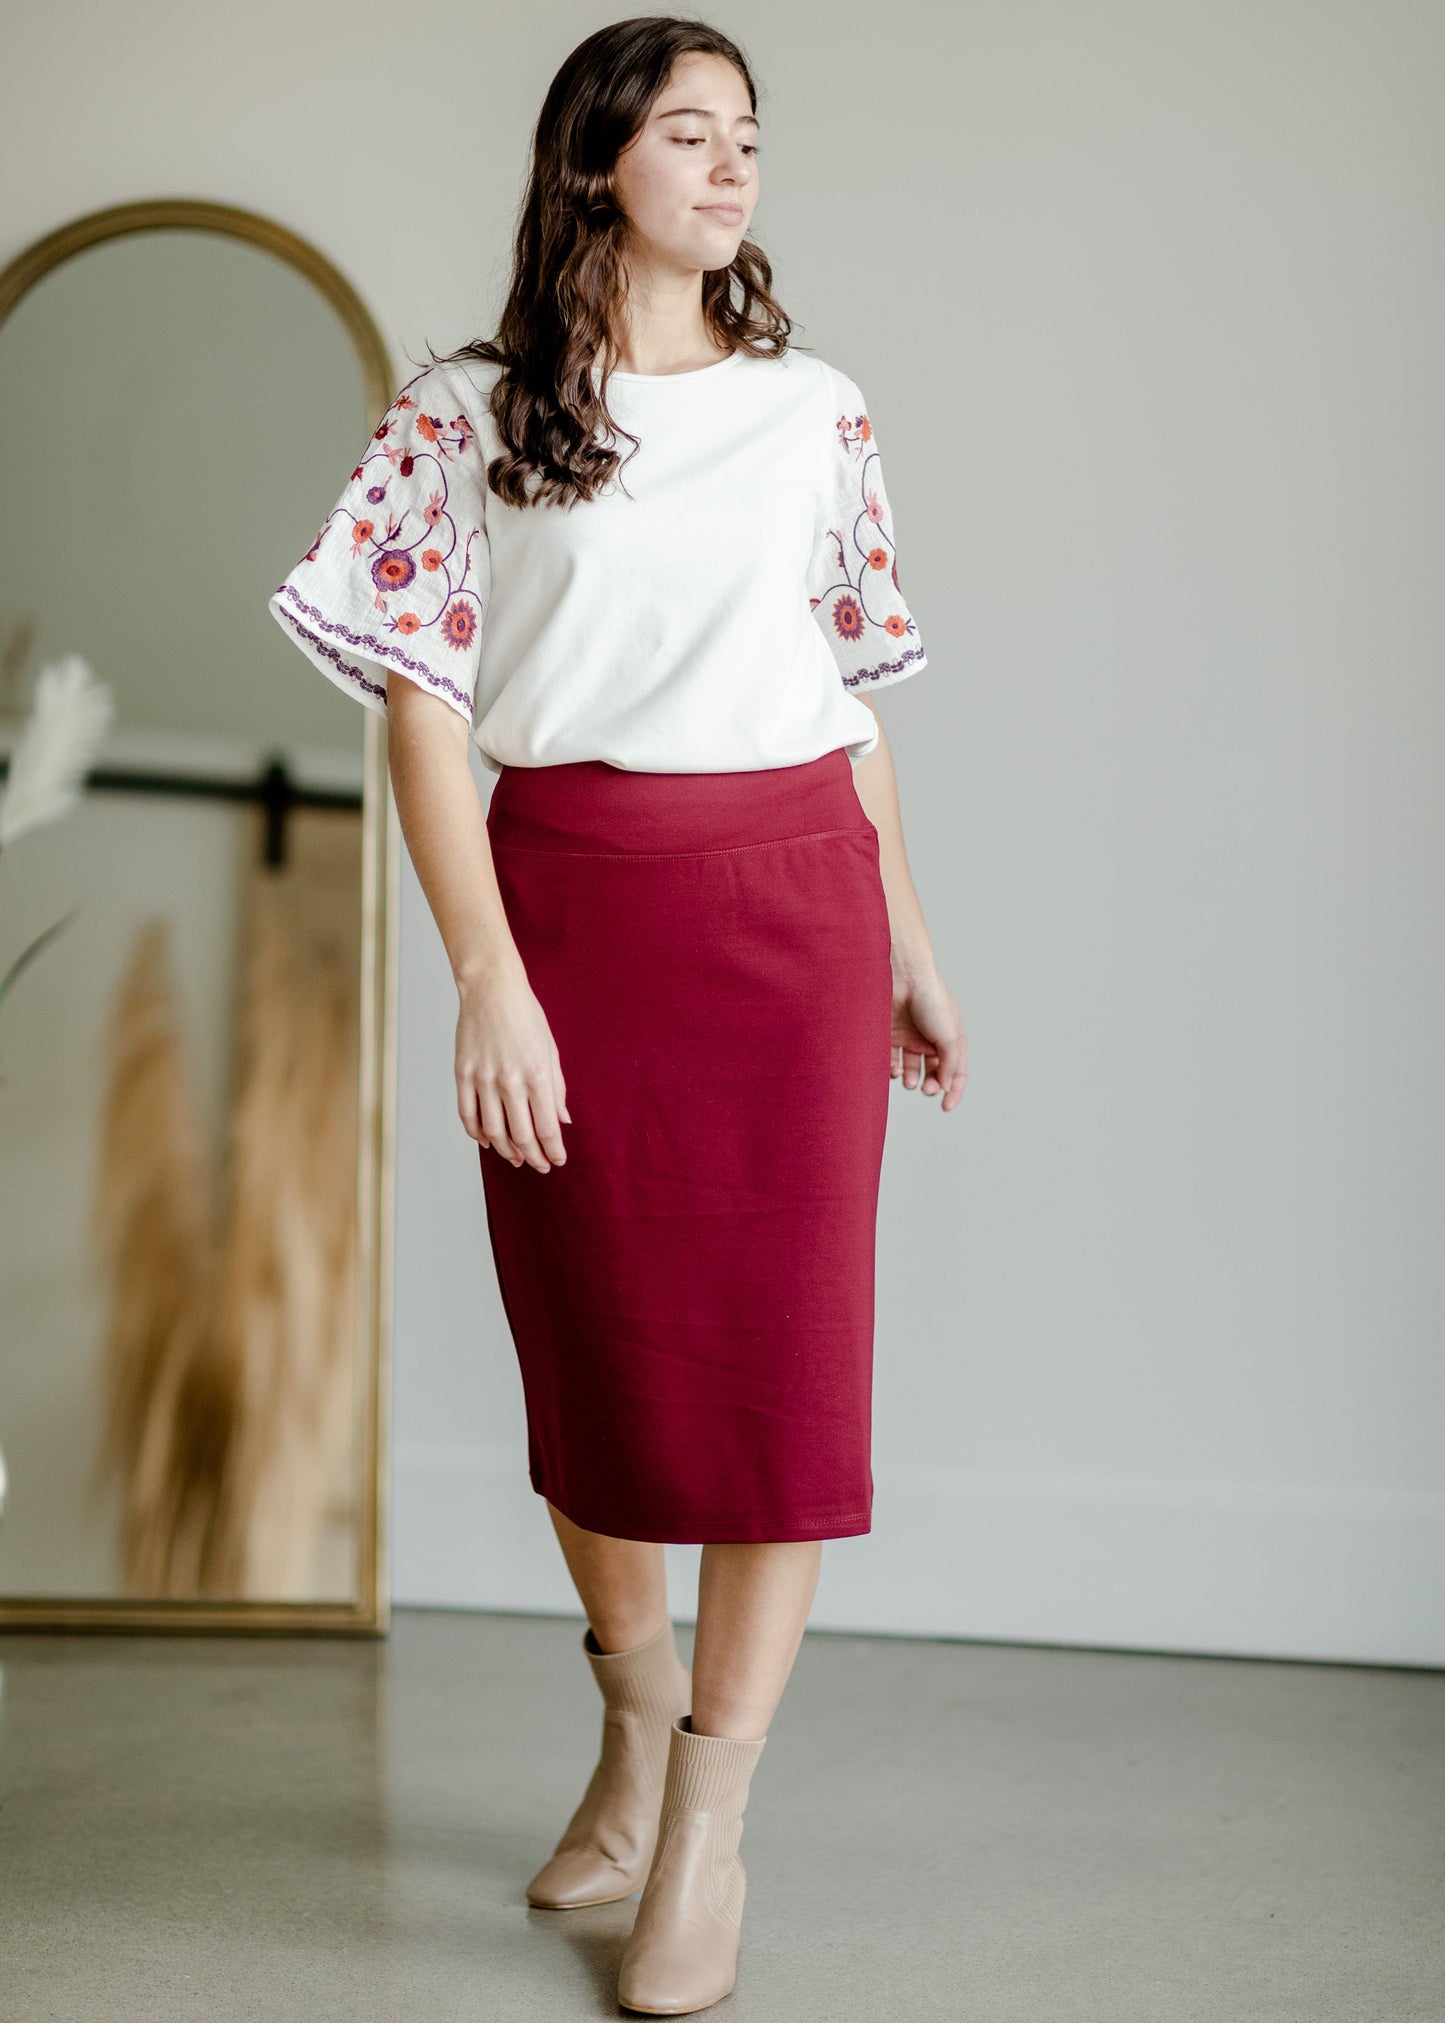 This is the quinn knit midi skirt that is made of high quality knit with a stretch waistband and is in a streight fit.